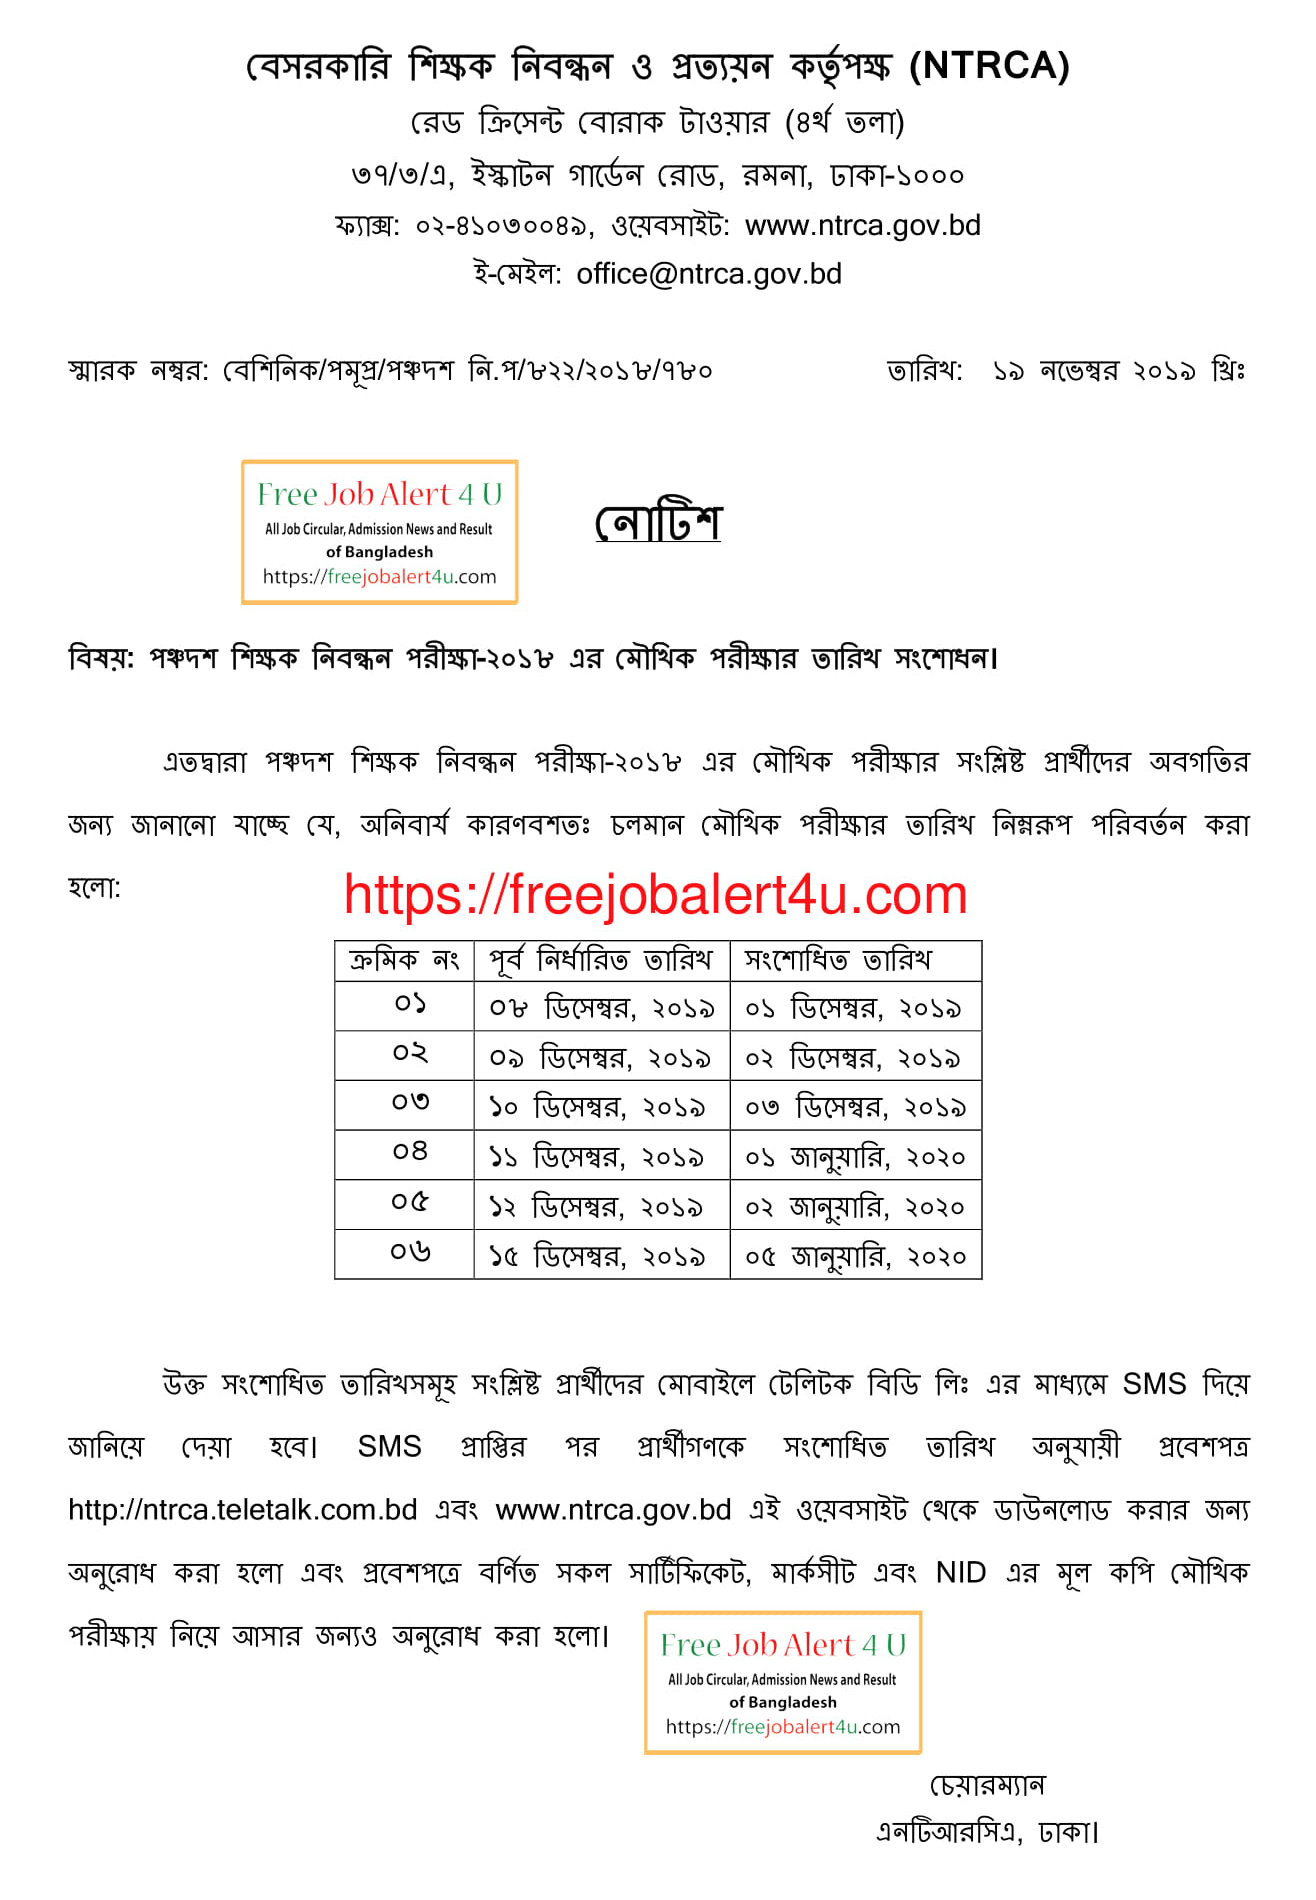 15th Non-Government Teachers’ Registration & Certification Authority (NTRCA) Viva Admit Card Download 2019